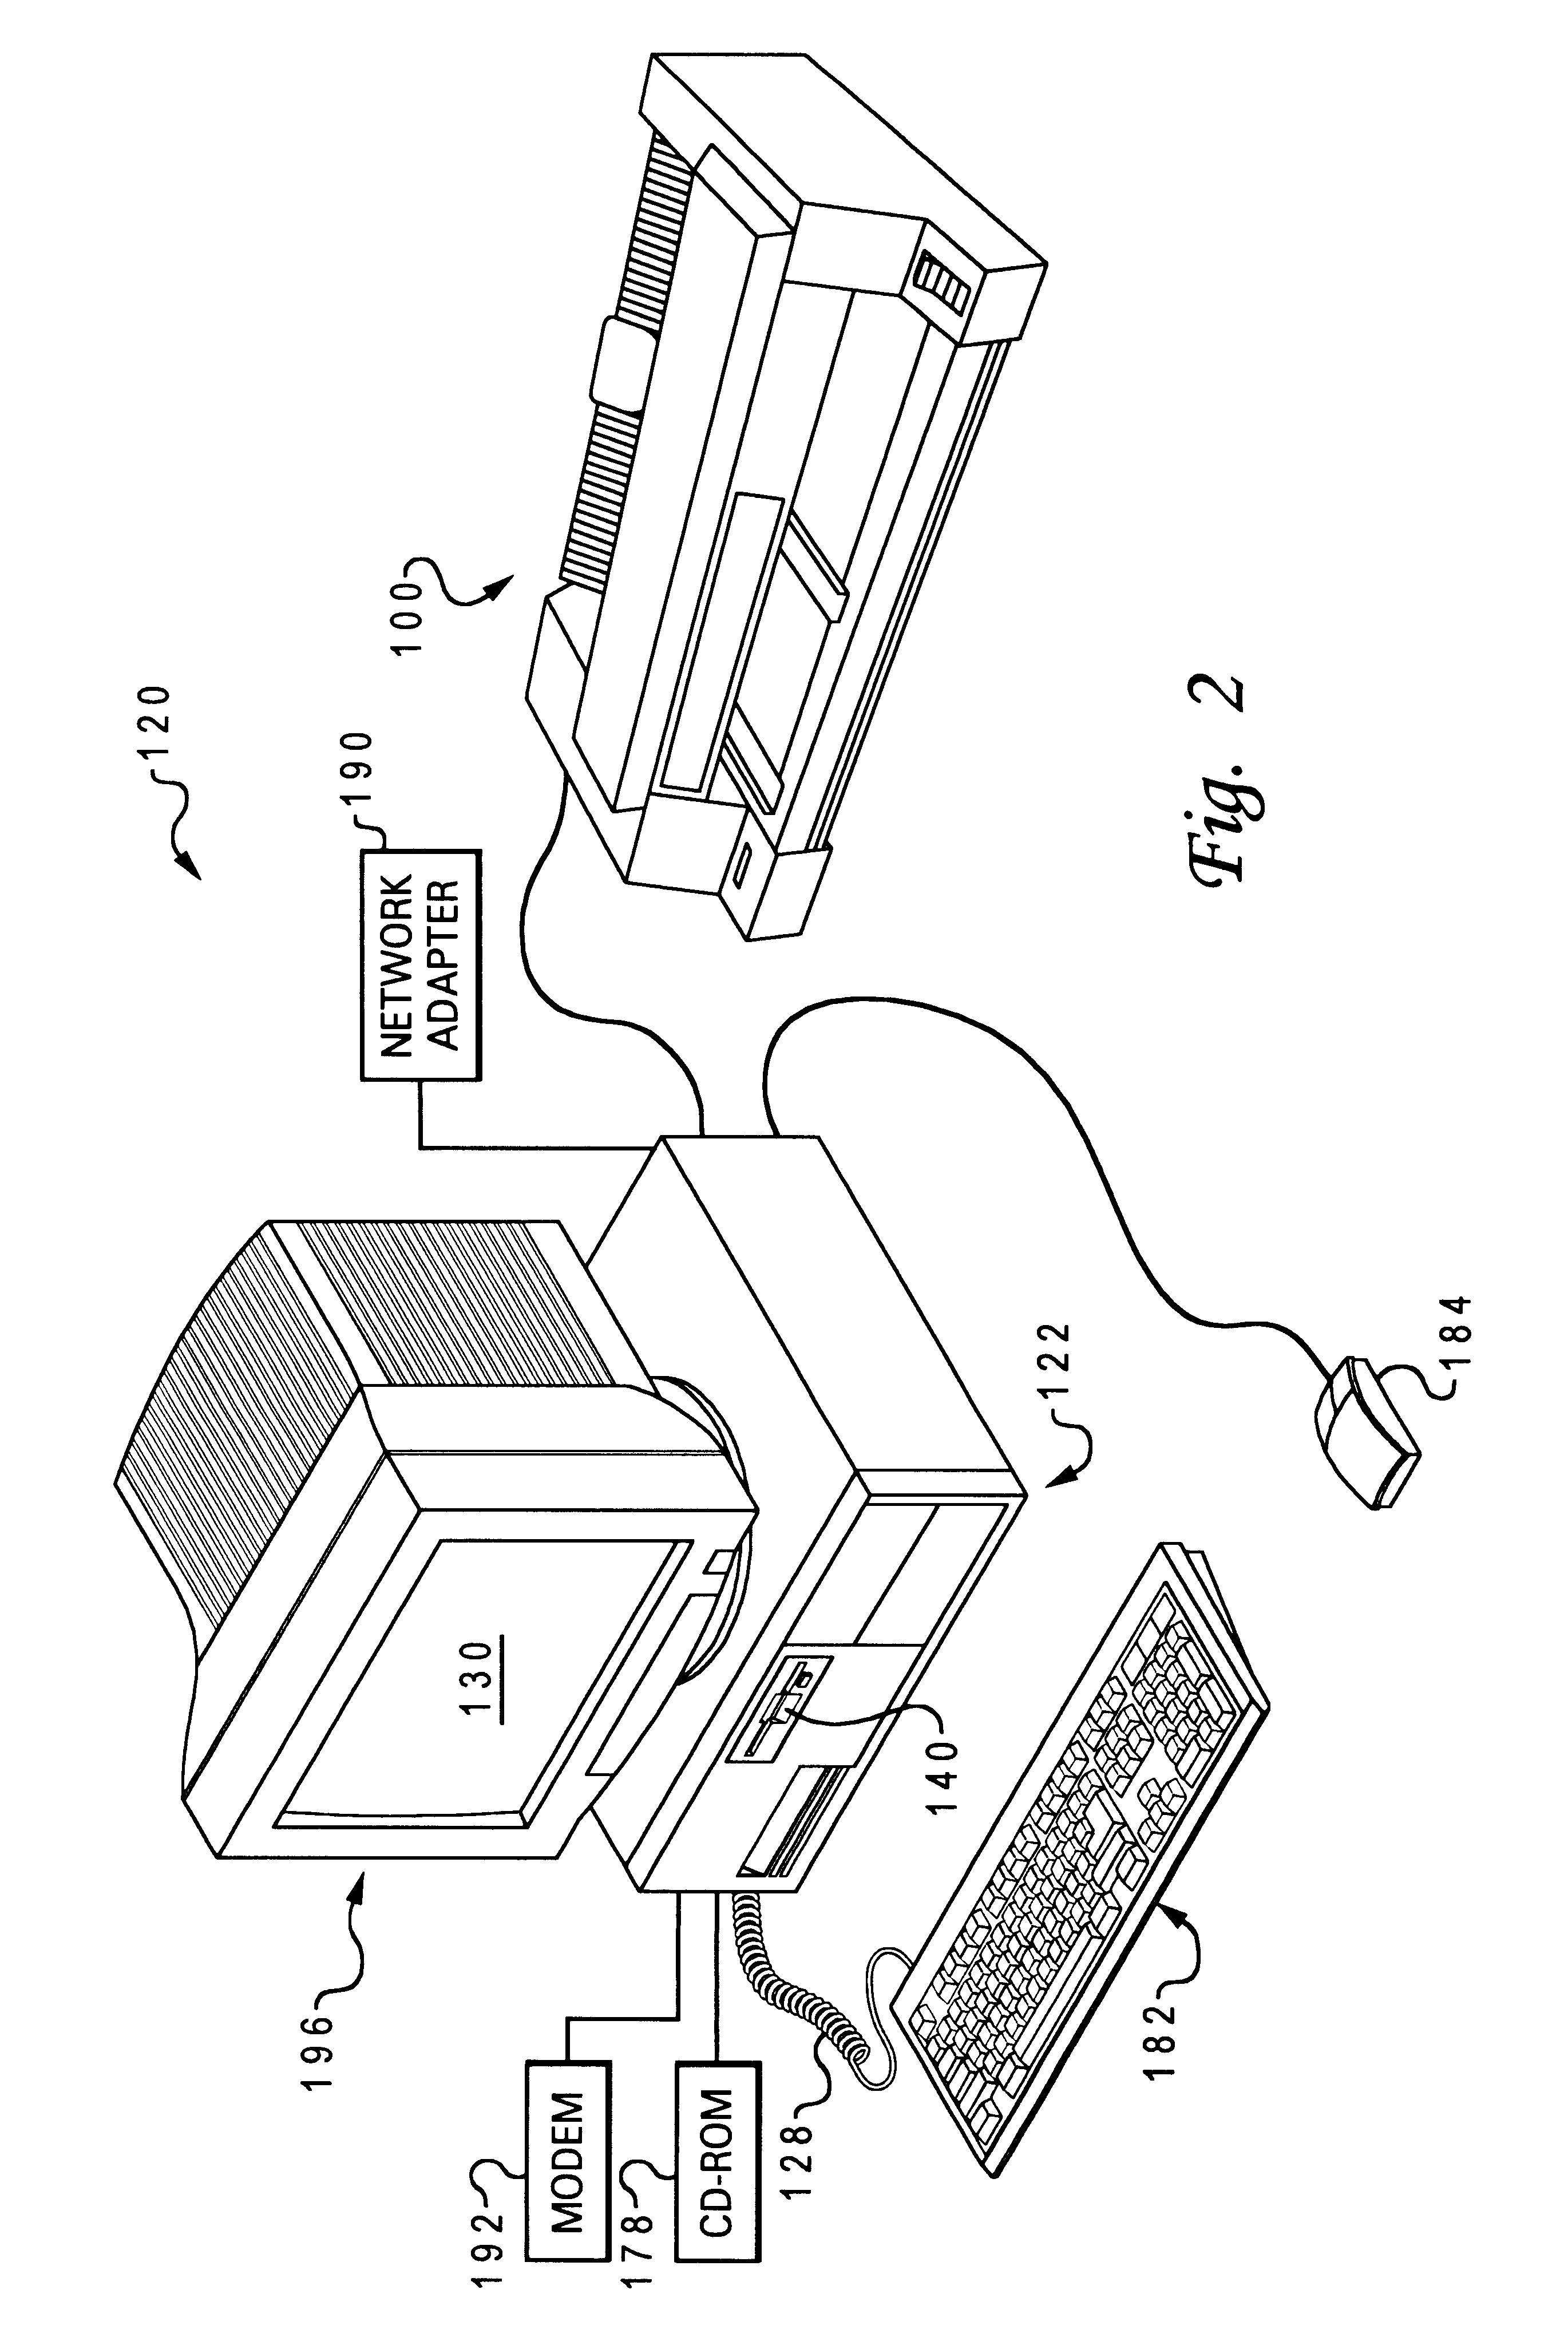 Layered local cache with lower level cache updating upper and lower level cache directories